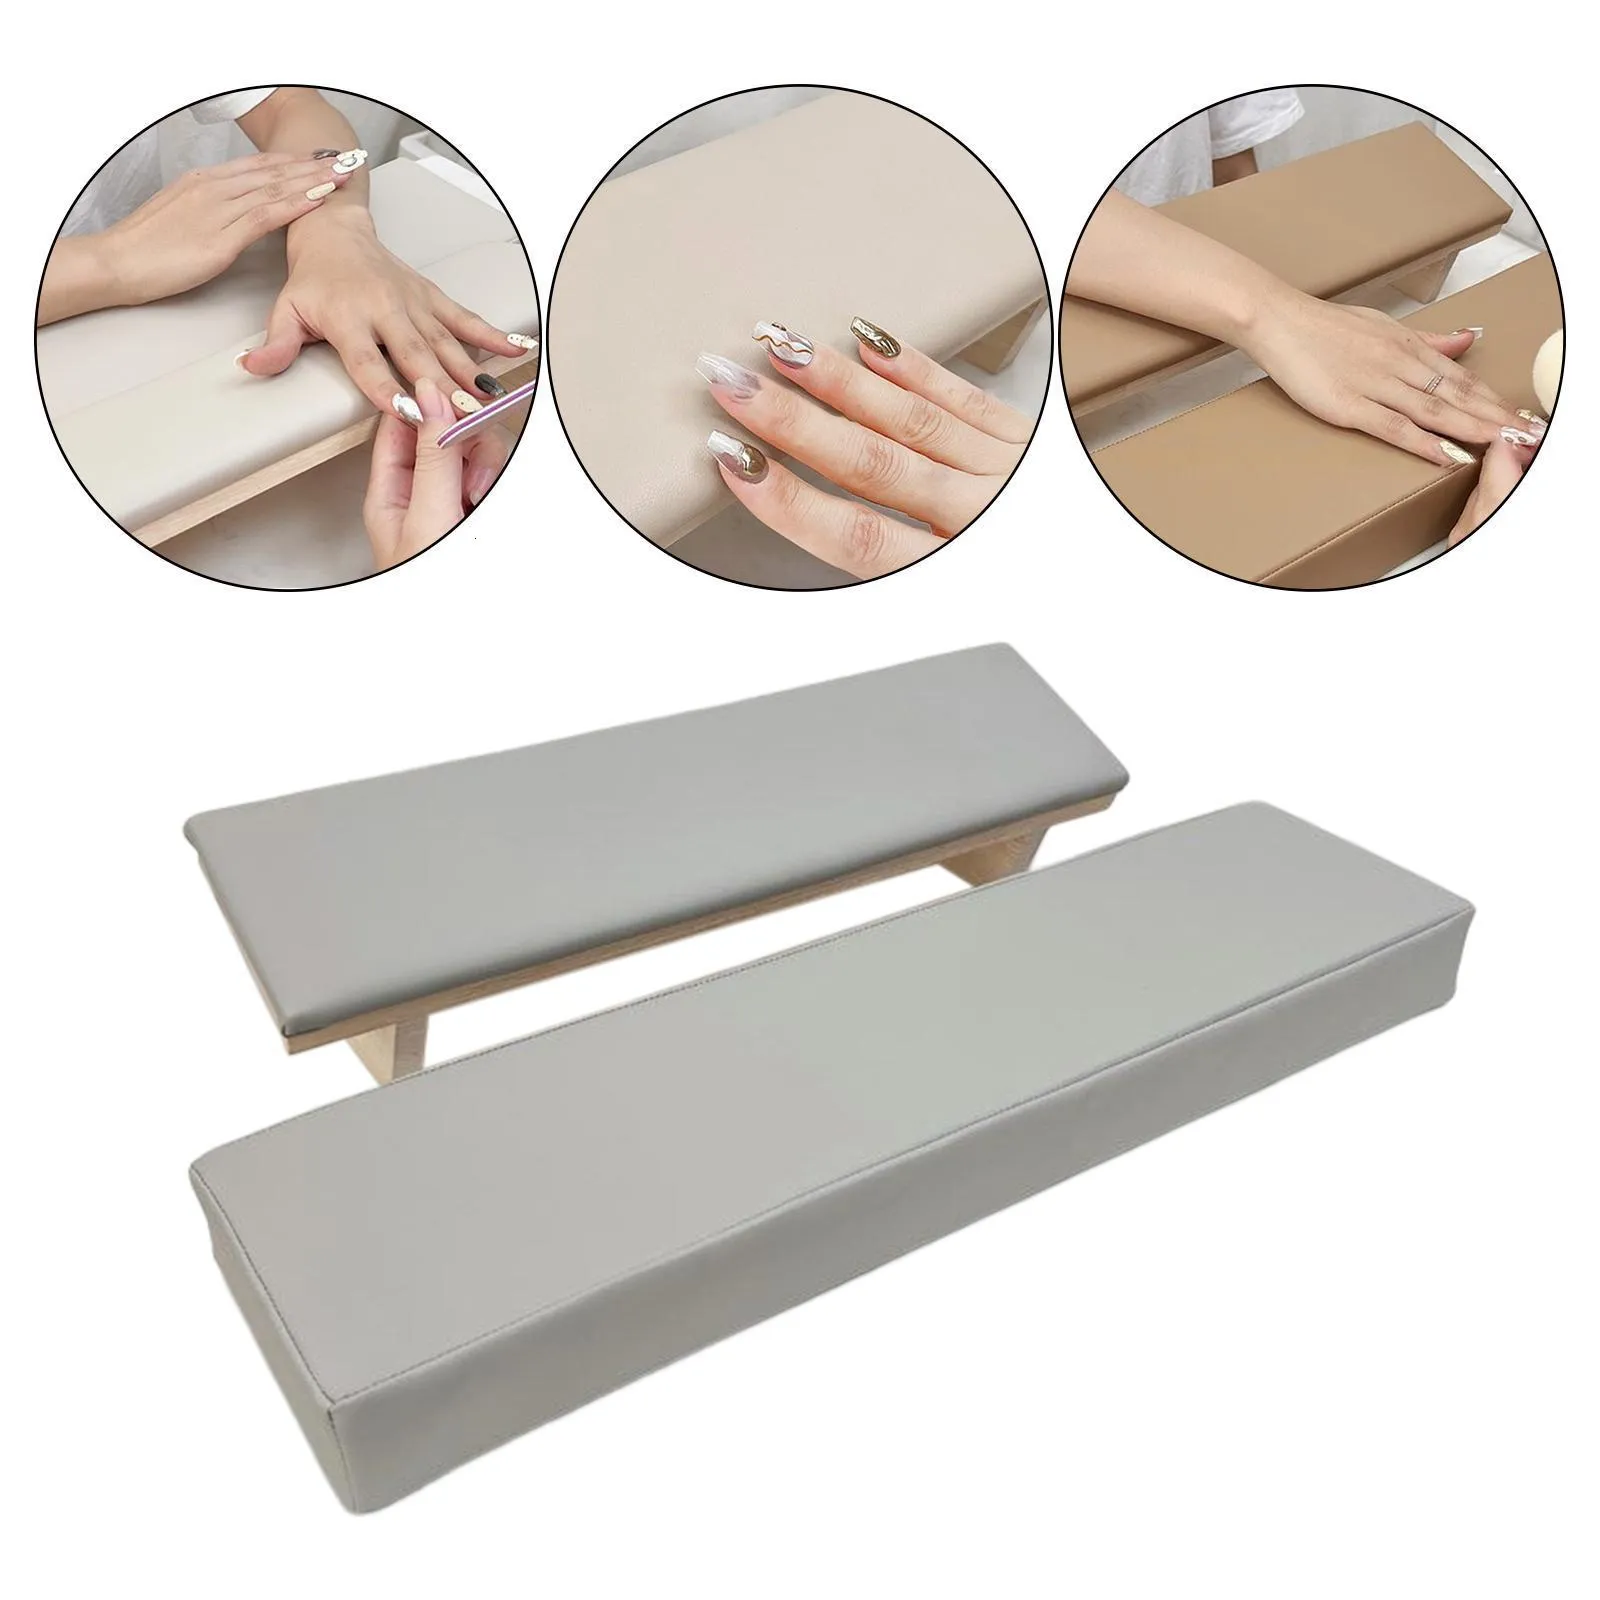 Nail Arm Rest Soft Comfortable Accessories PU Stable Easy to Clean Holder Hand Set for Table Home Manicure Salon